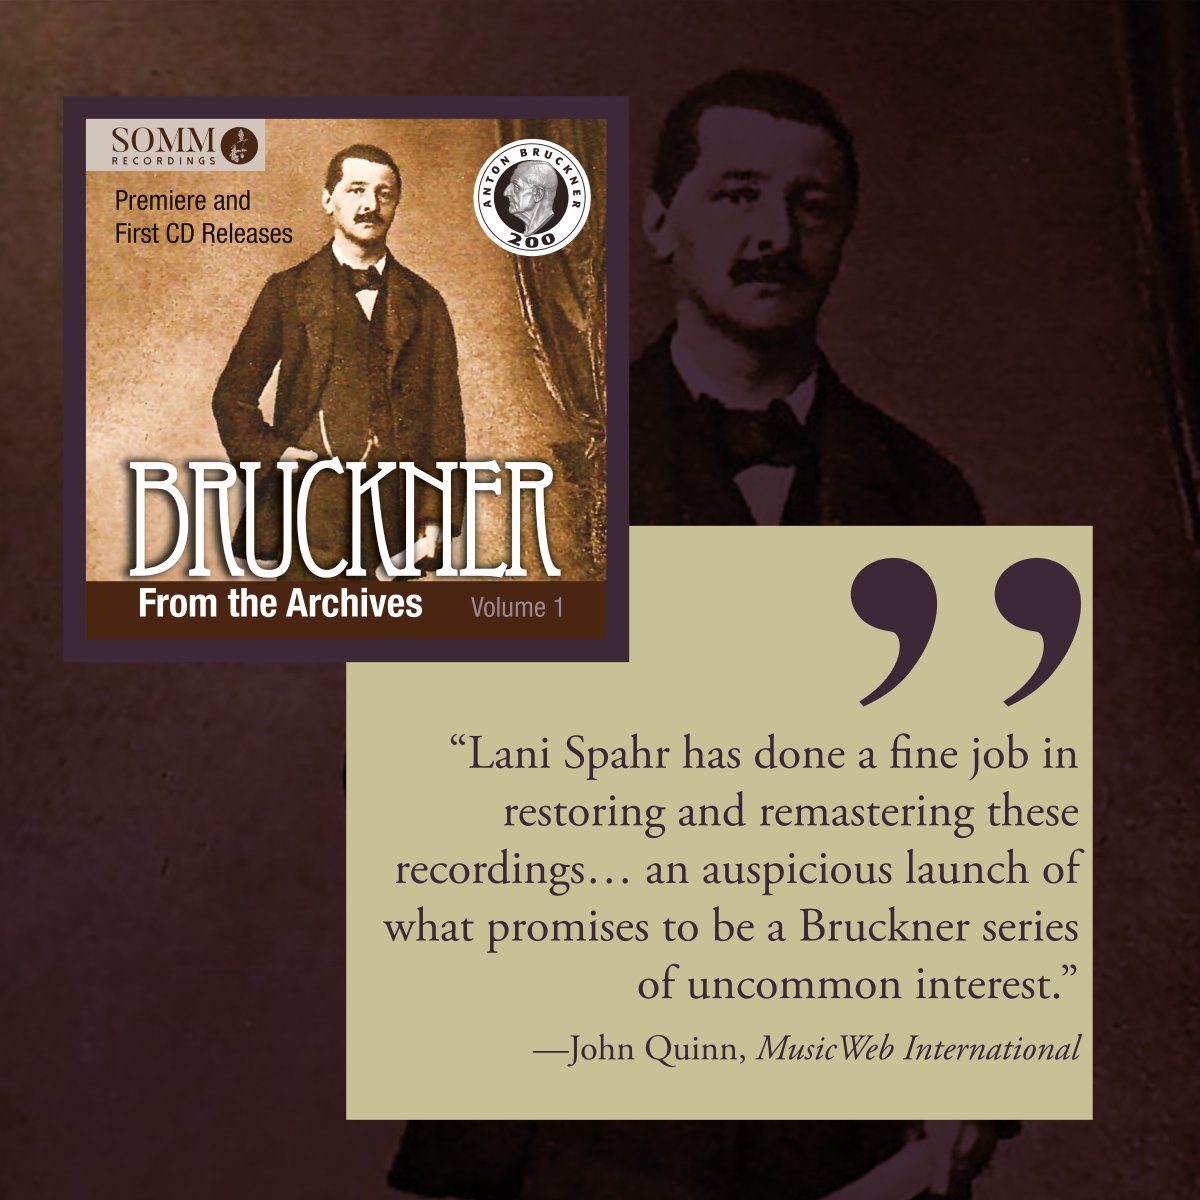 “This is an auspicious launch of what promises to be a Bruckner series of uncommon interest.” —@MusicWebInt on #BrucknerFromTheArchives Vol 1: musicwebinternational.com/?p=35742